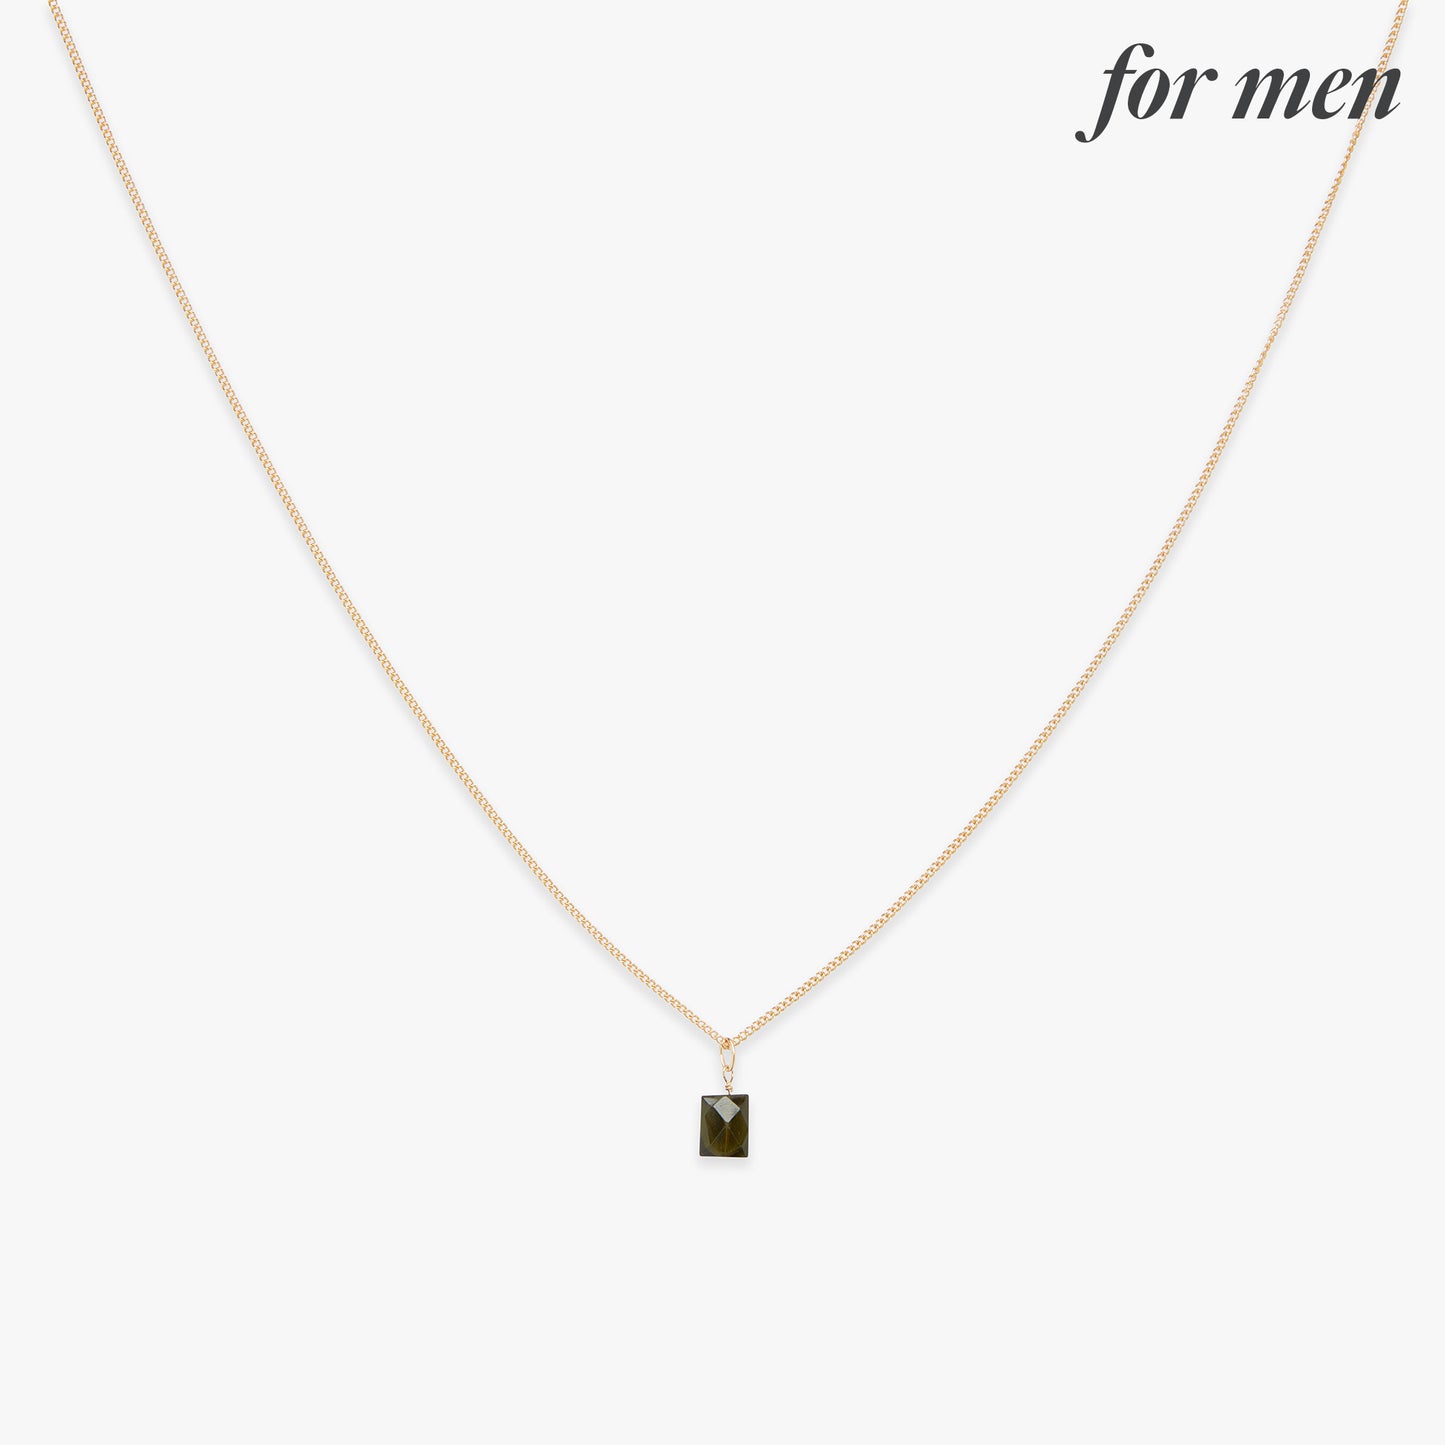 Minimal Janny ketting gold filled voor mannen